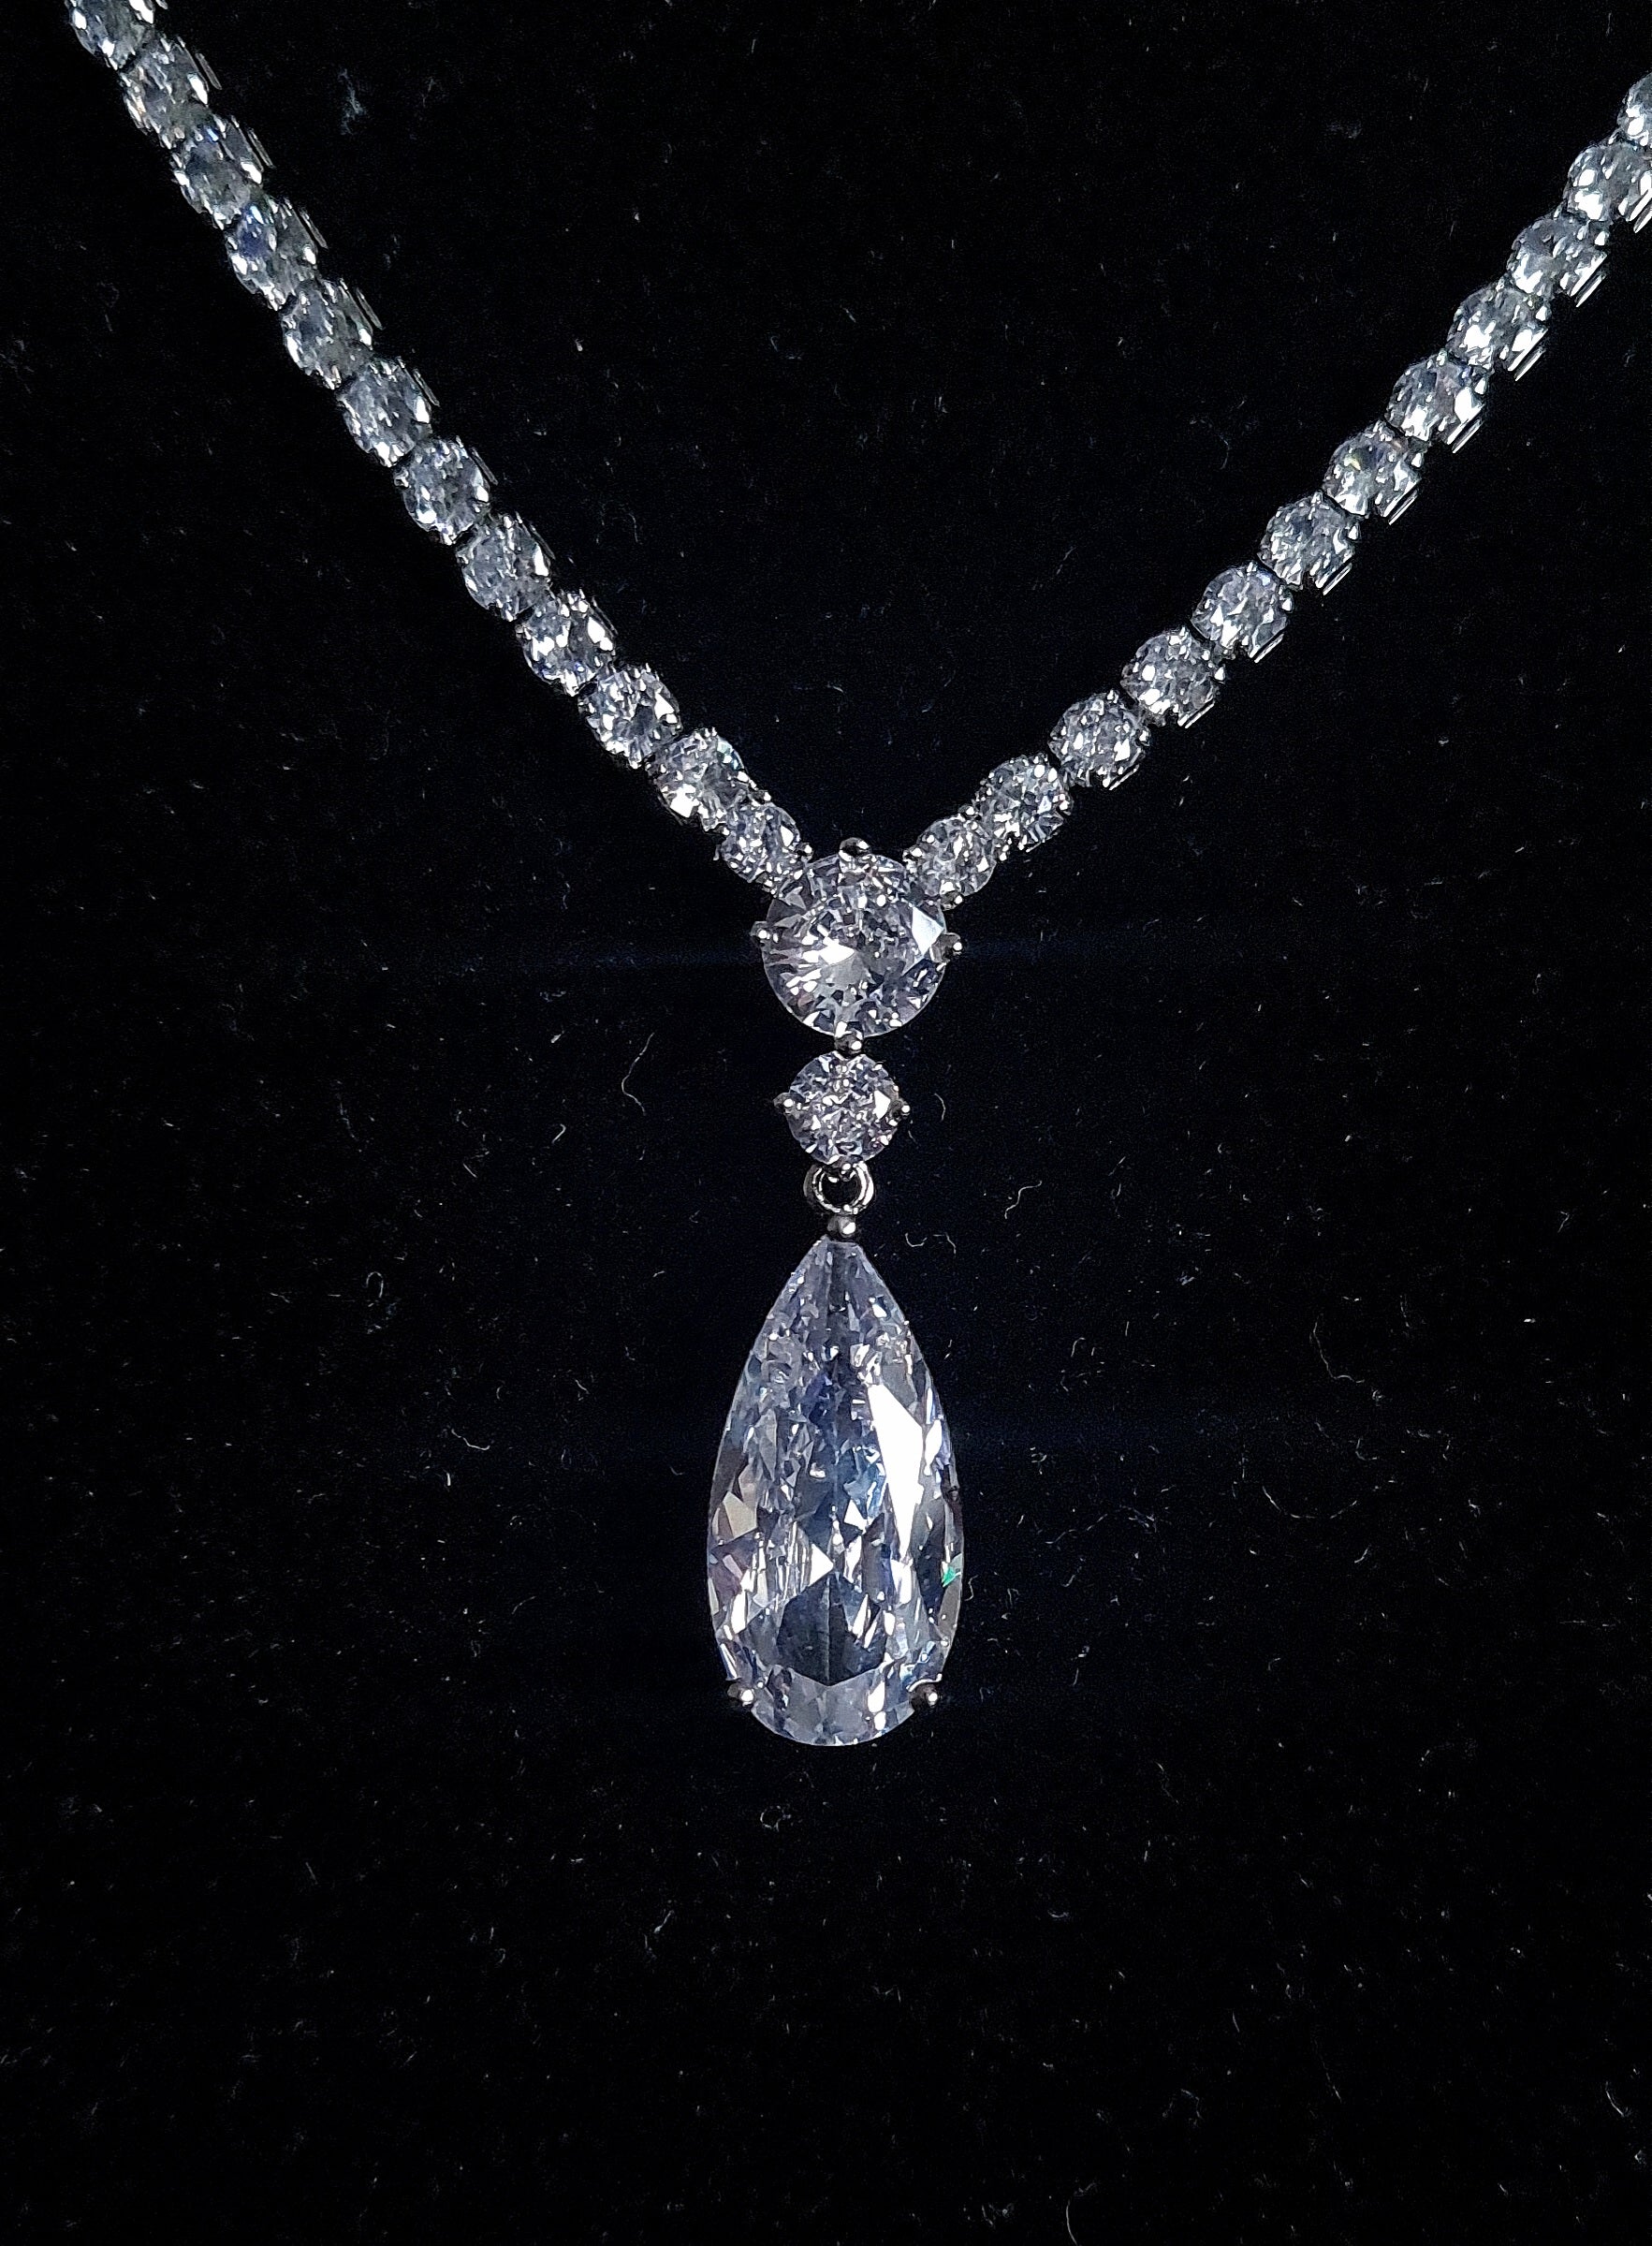 a close up view of a cubic zirconia necklace with teardrop shape center pendent the background is black.